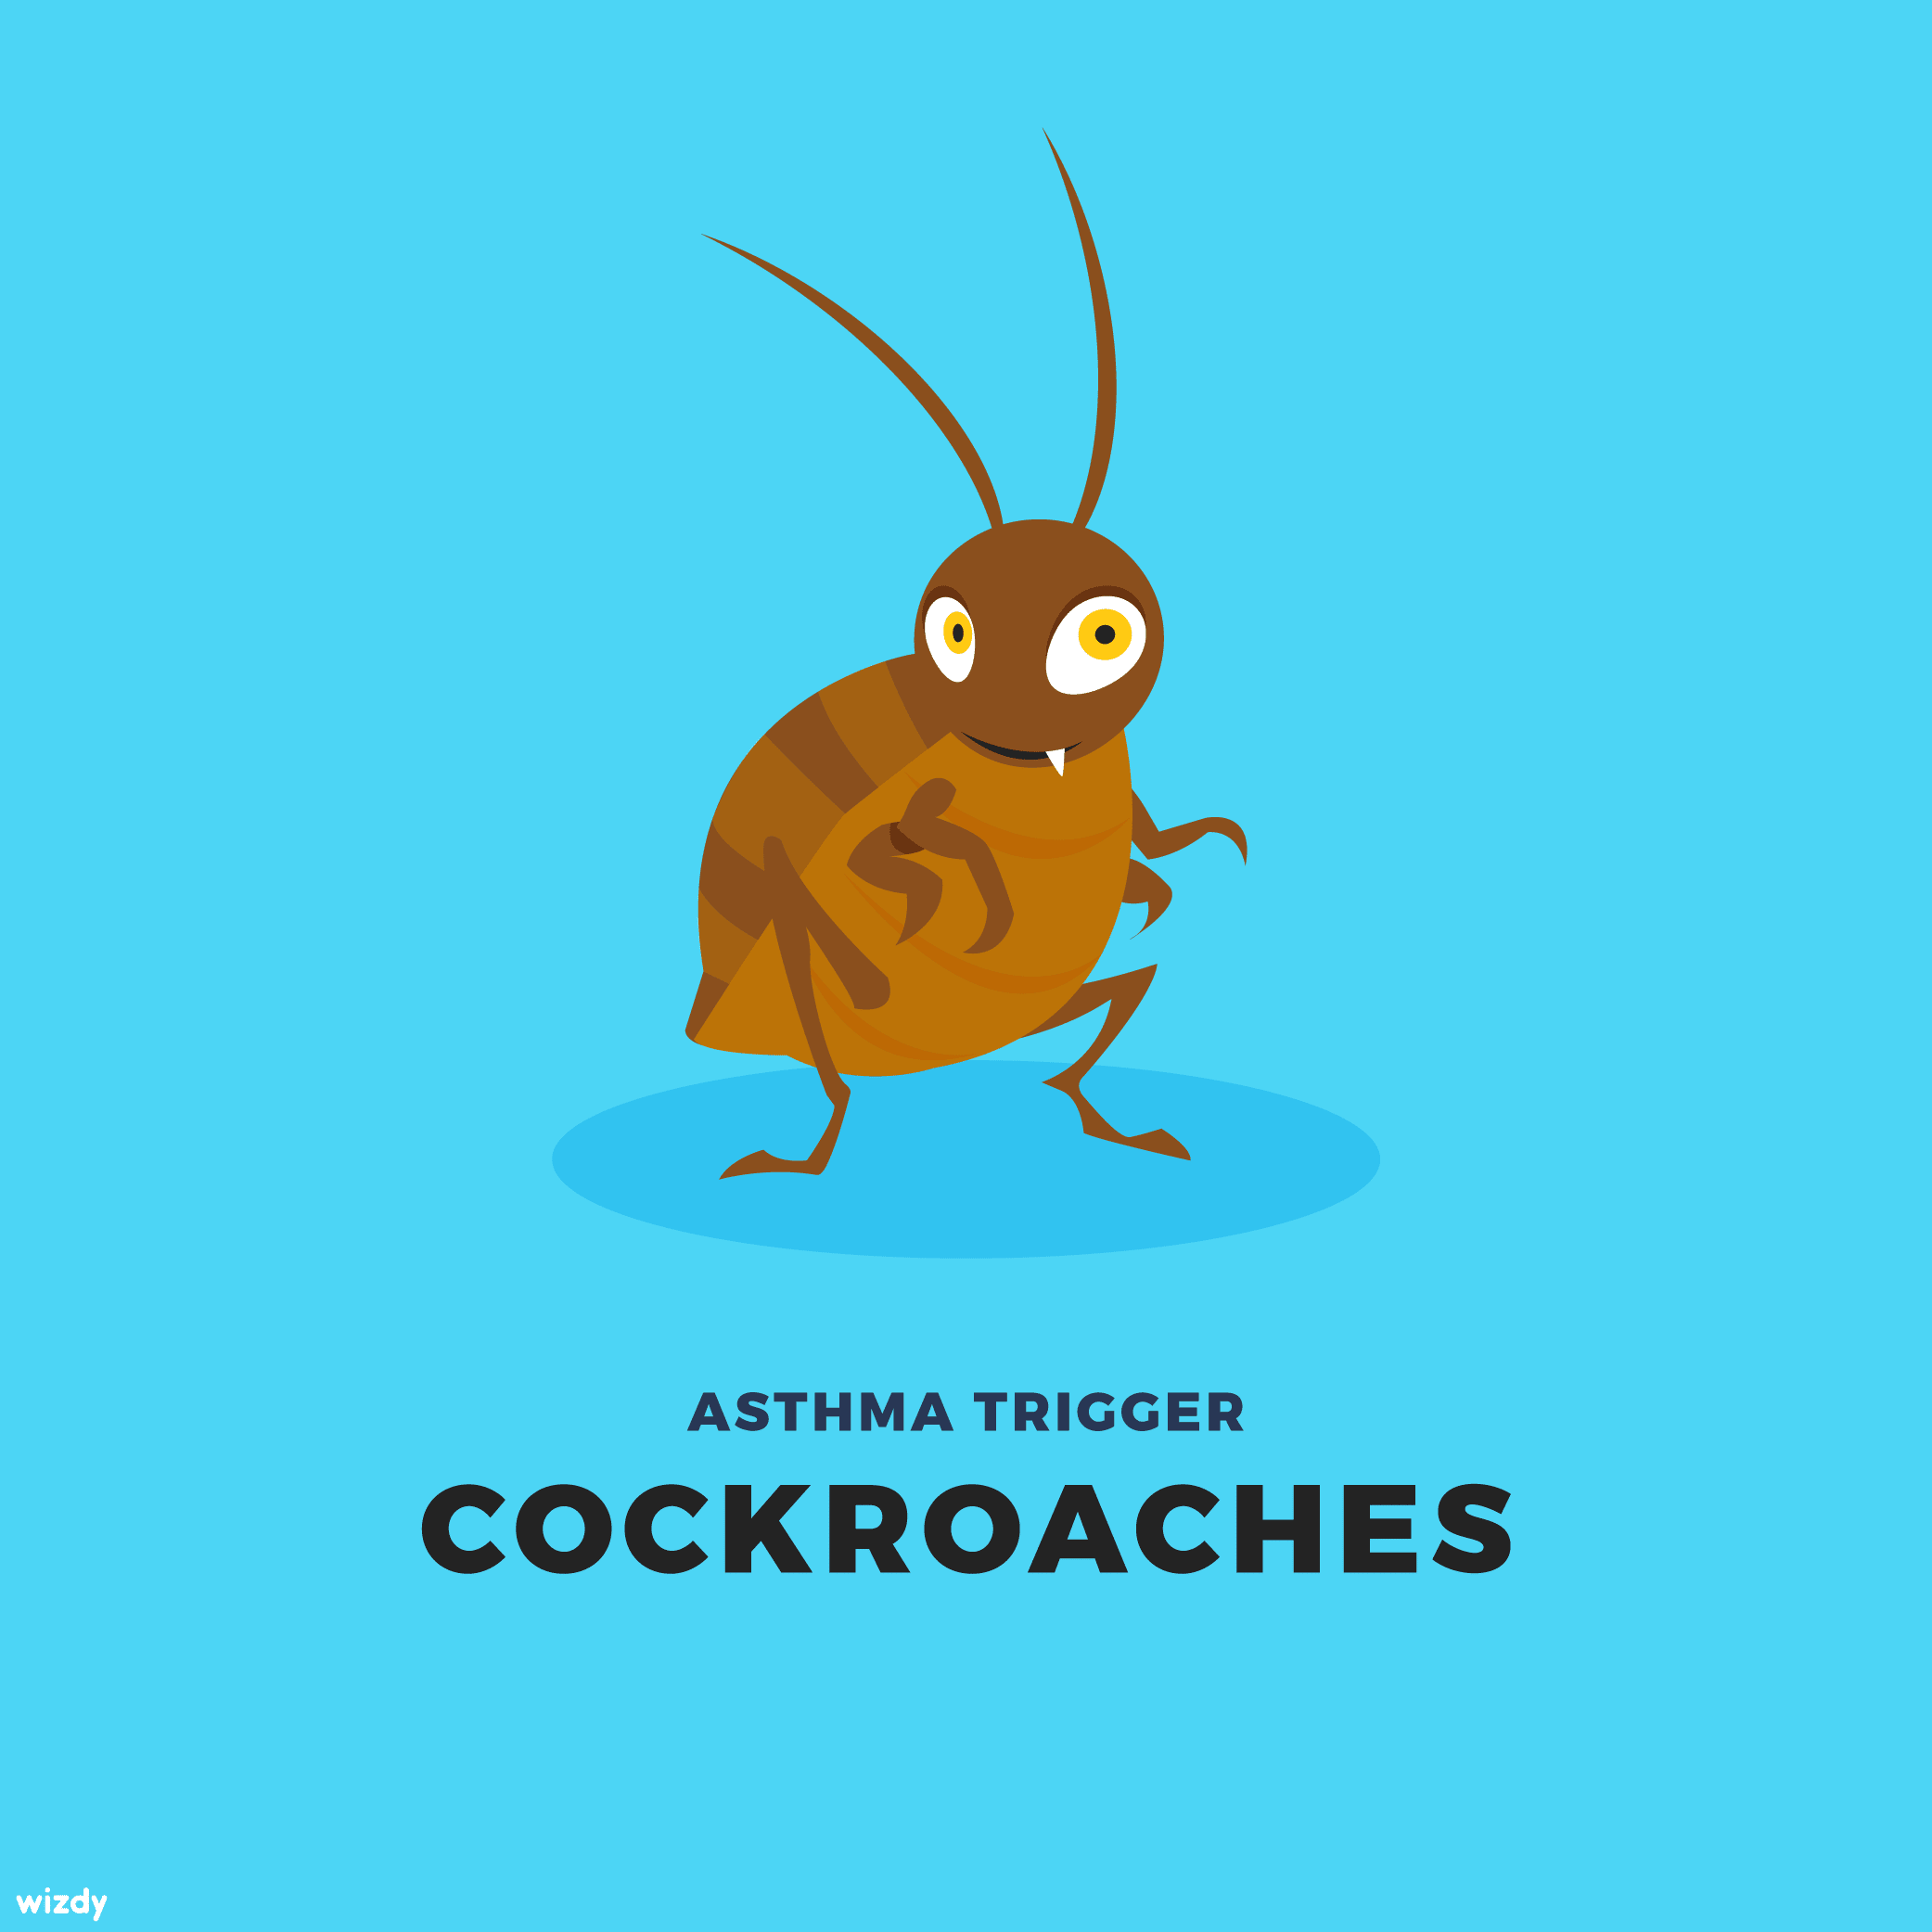 Did you know that cockroaches are an asthma trigger? Their waste ...